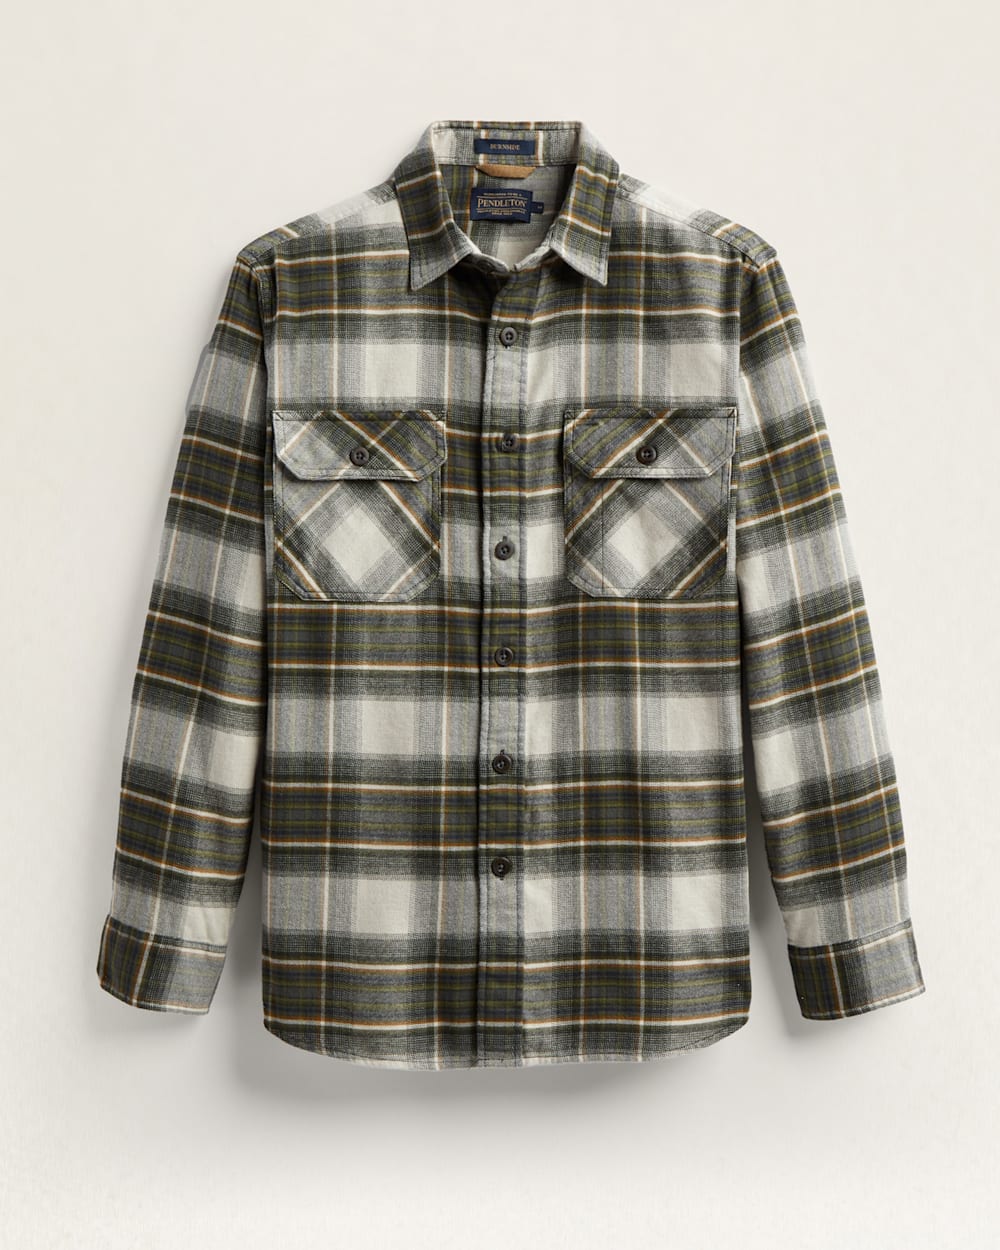 MEN'S PLAID BURNSIDE DOUBLE-BRUSHED FLANNEL SHIRT IN TAN/OLIVE/BROWN PLAID image number 1